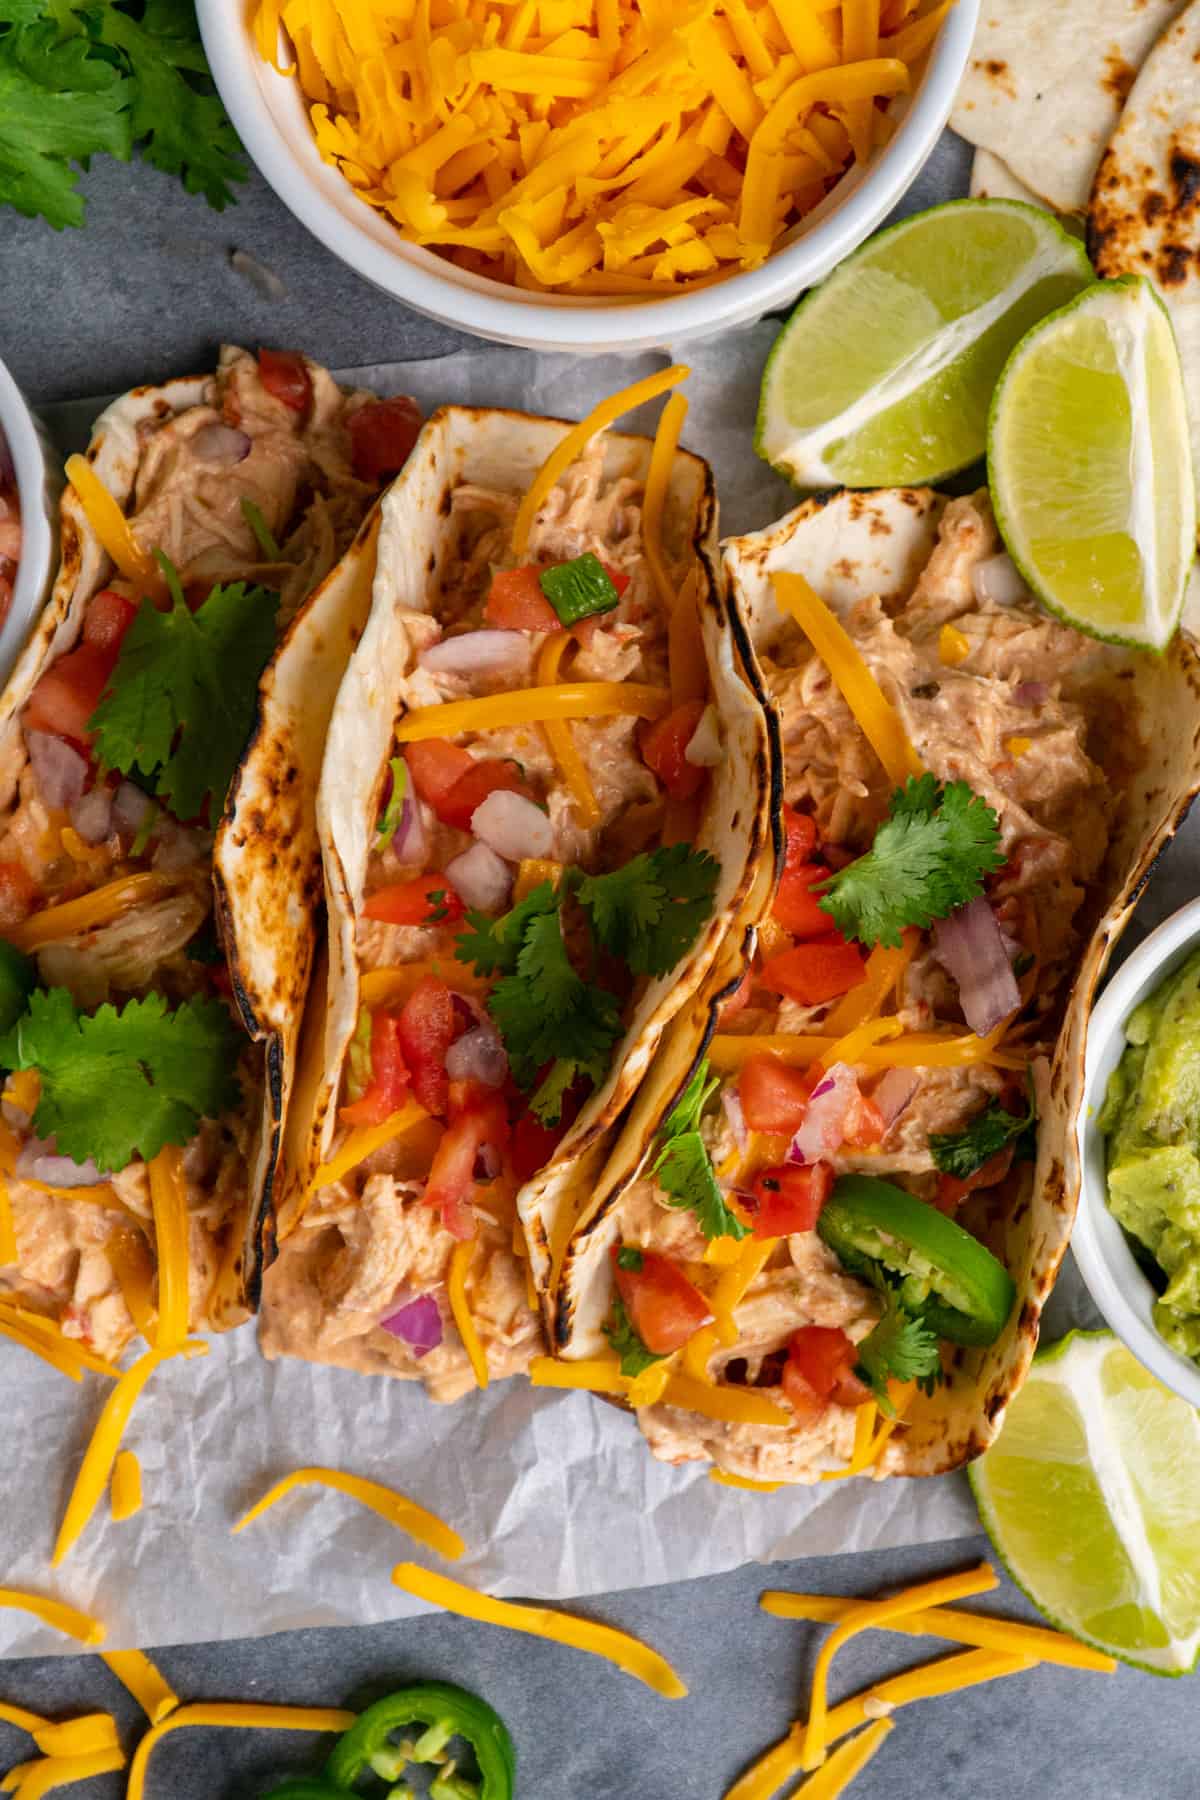 Three chicken tacos with toppings and limes in the background.